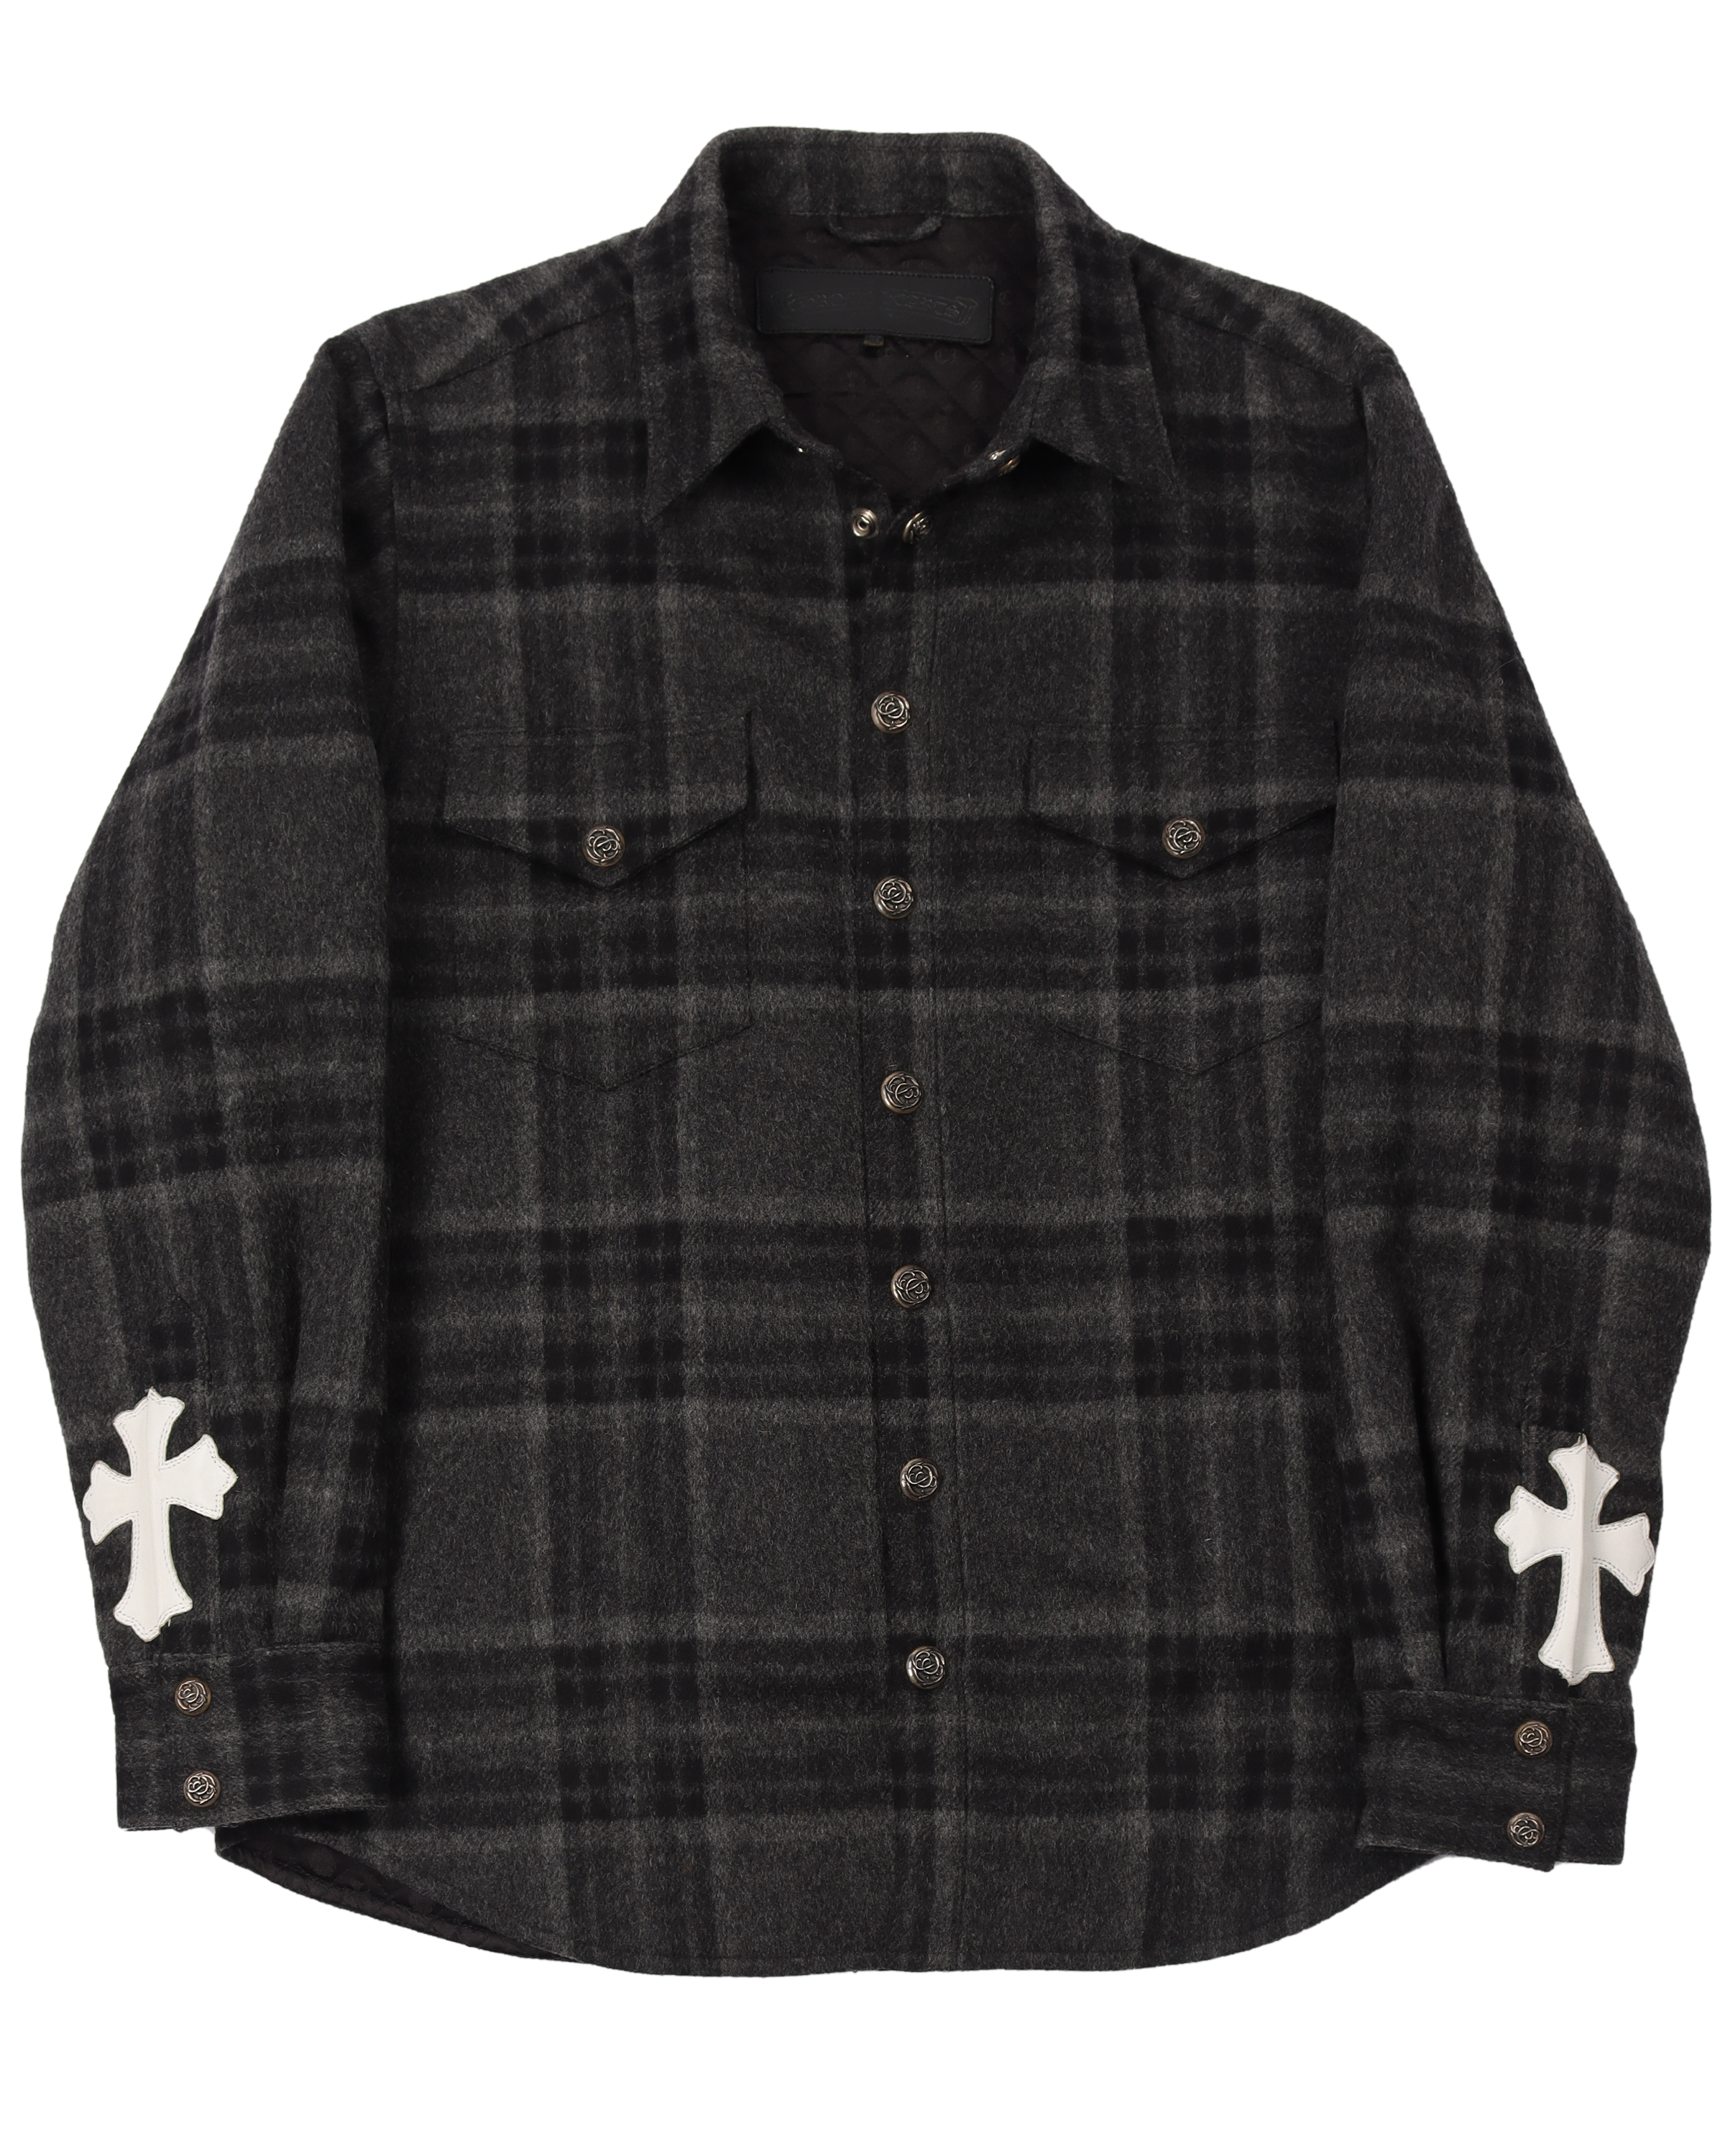 Leather Cross Patch Wool Jacket Shirt